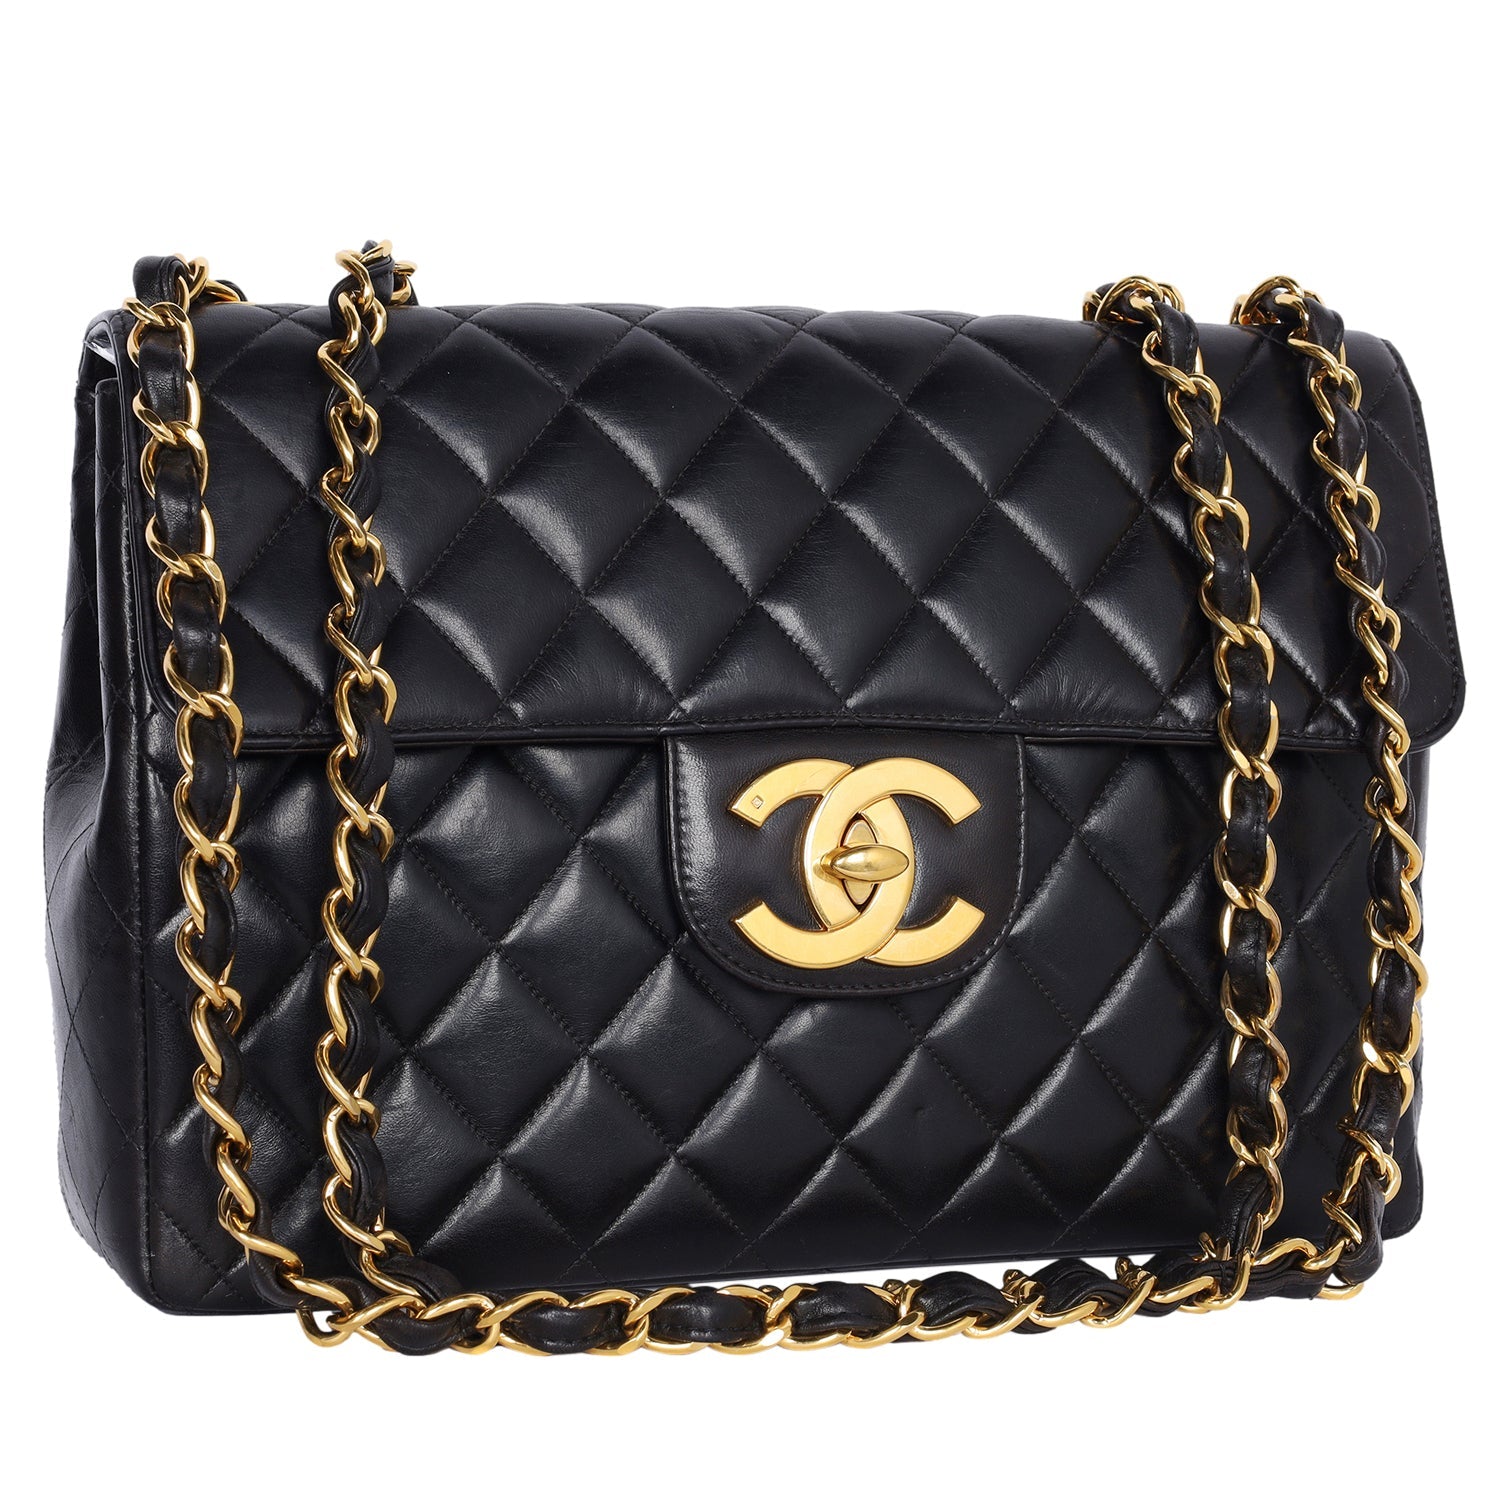 CC Vintage Chanel Black Quilted Jumbo Classic Flap Bag (Authentic Pre-Owned)